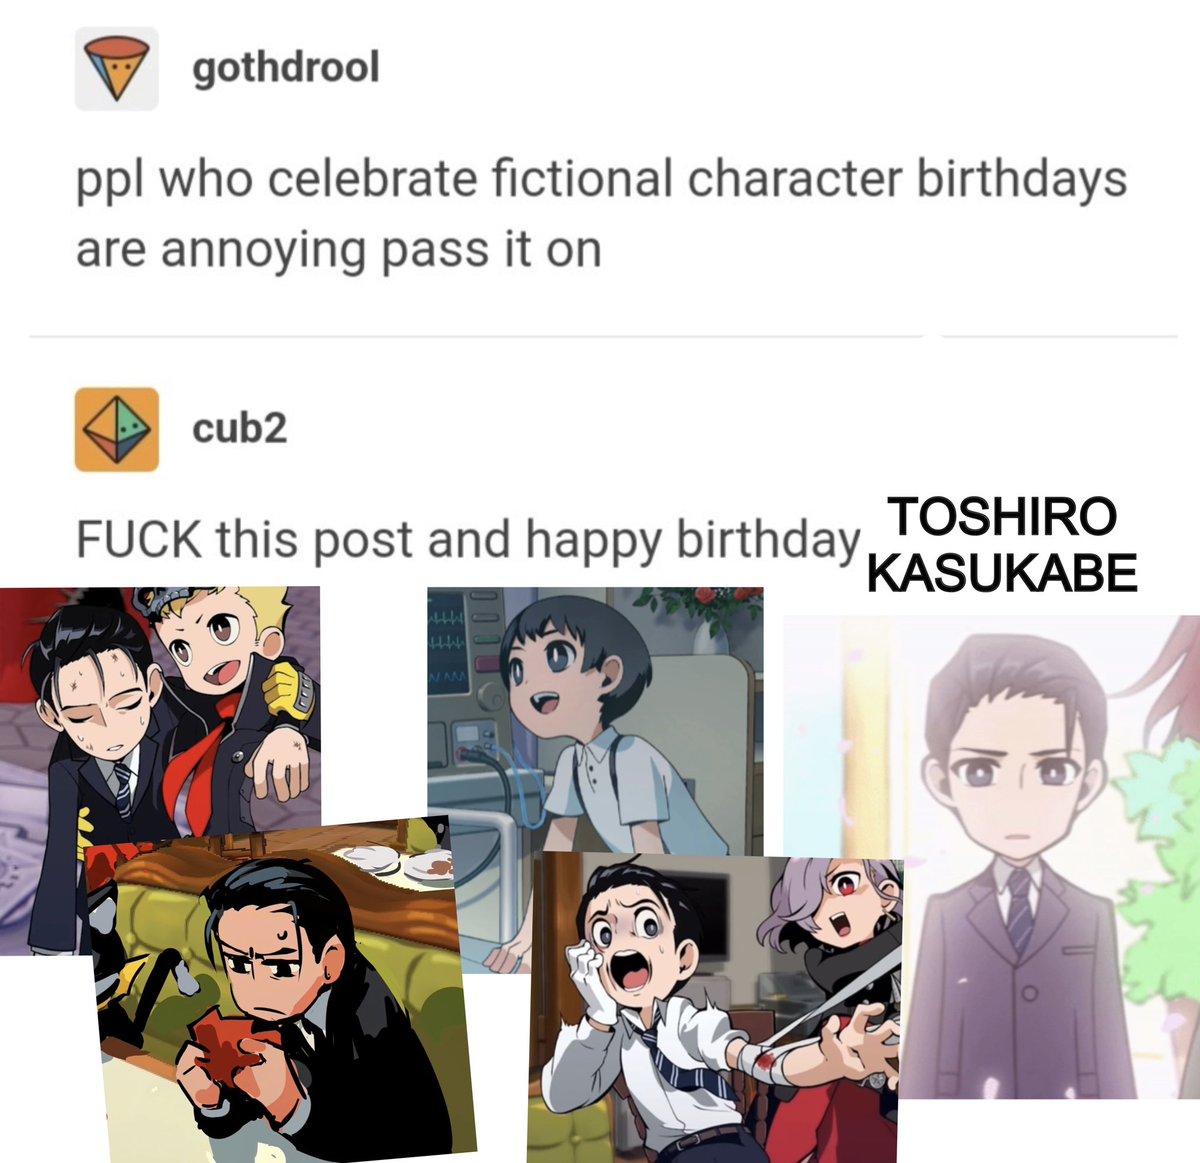 it’s officially his day now